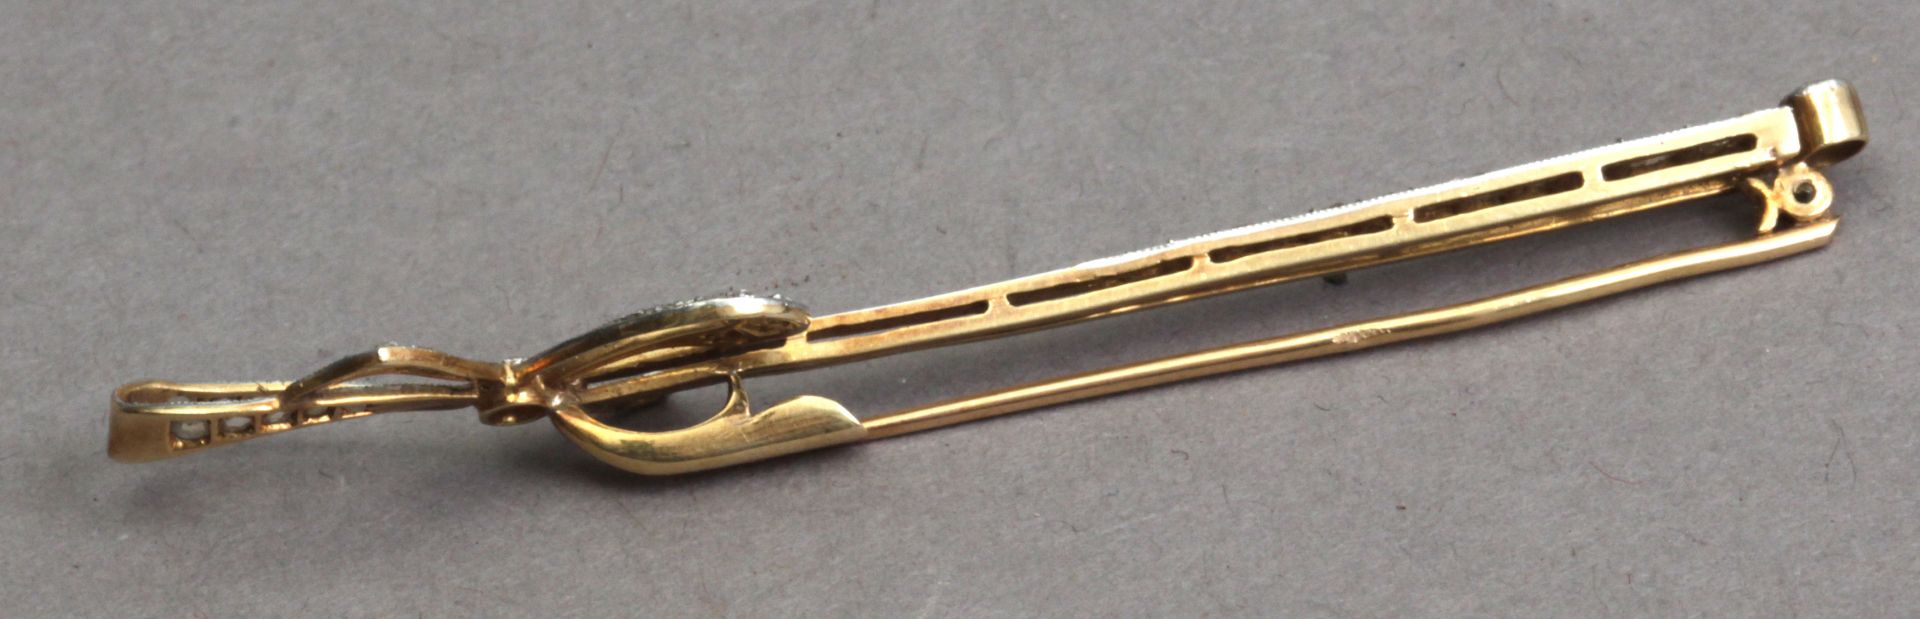 An early 20th century Belle Époque diamond tie pin with an 18 k. yellow gold and platinum setting - Image 4 of 4